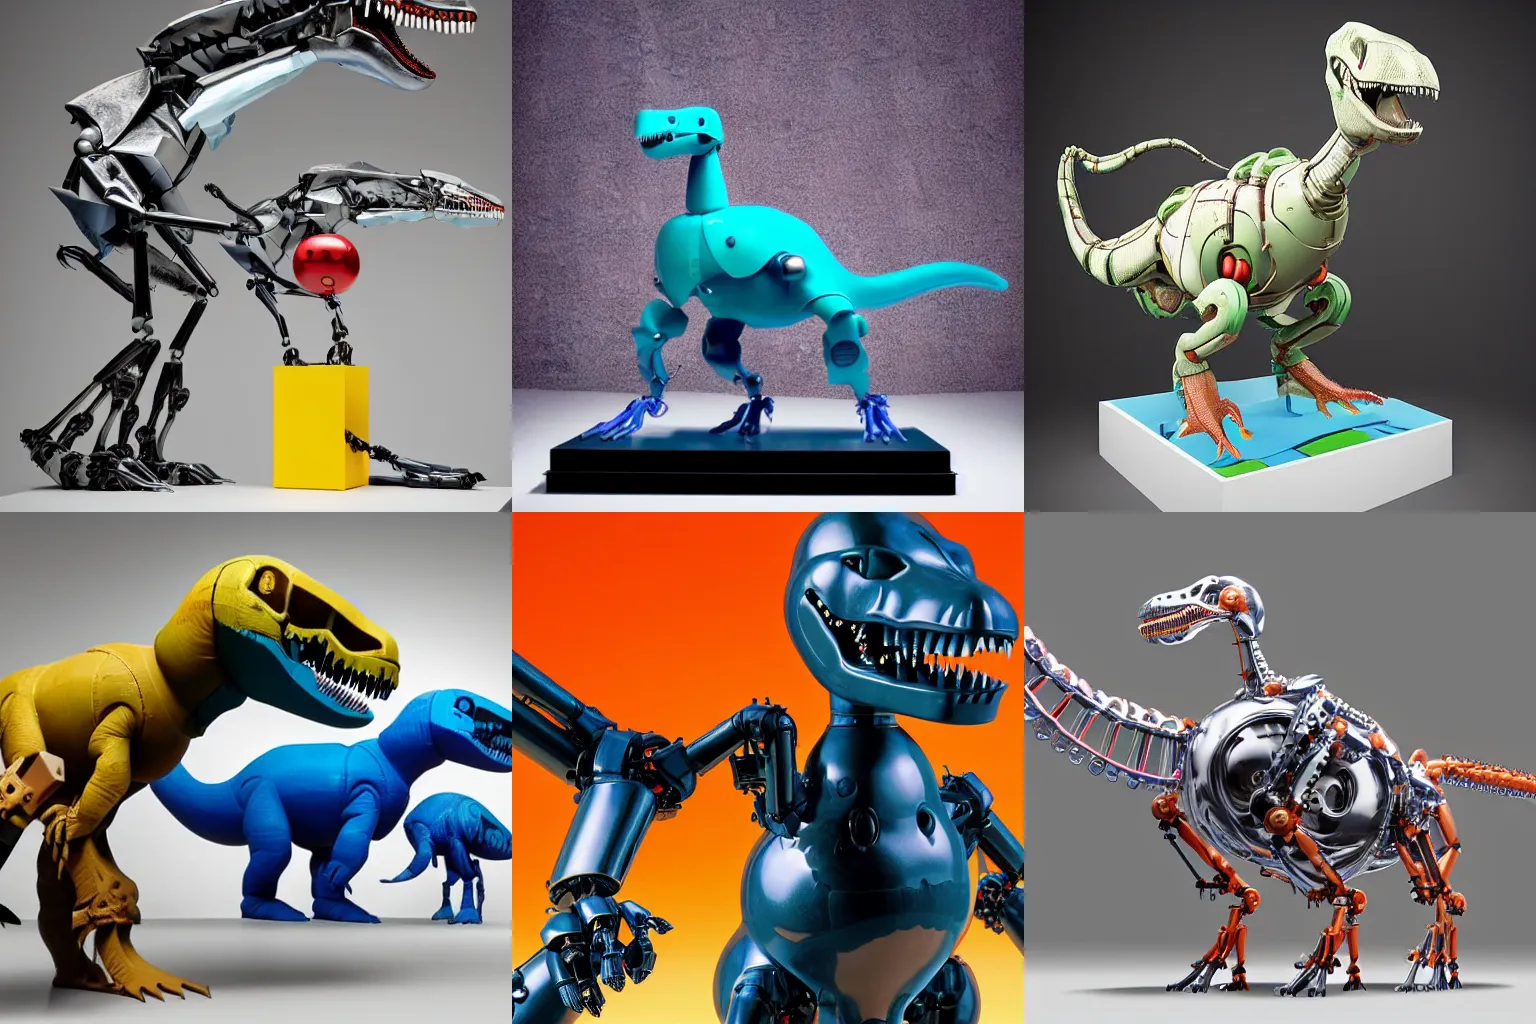 Prompt: A propaganda, plastic simple funny mechanical mechabot dinosaur pictoplasma characterdesign toy sculpture, by david lachapelle, by jeff koons, in a black empty studio hollow, c4d